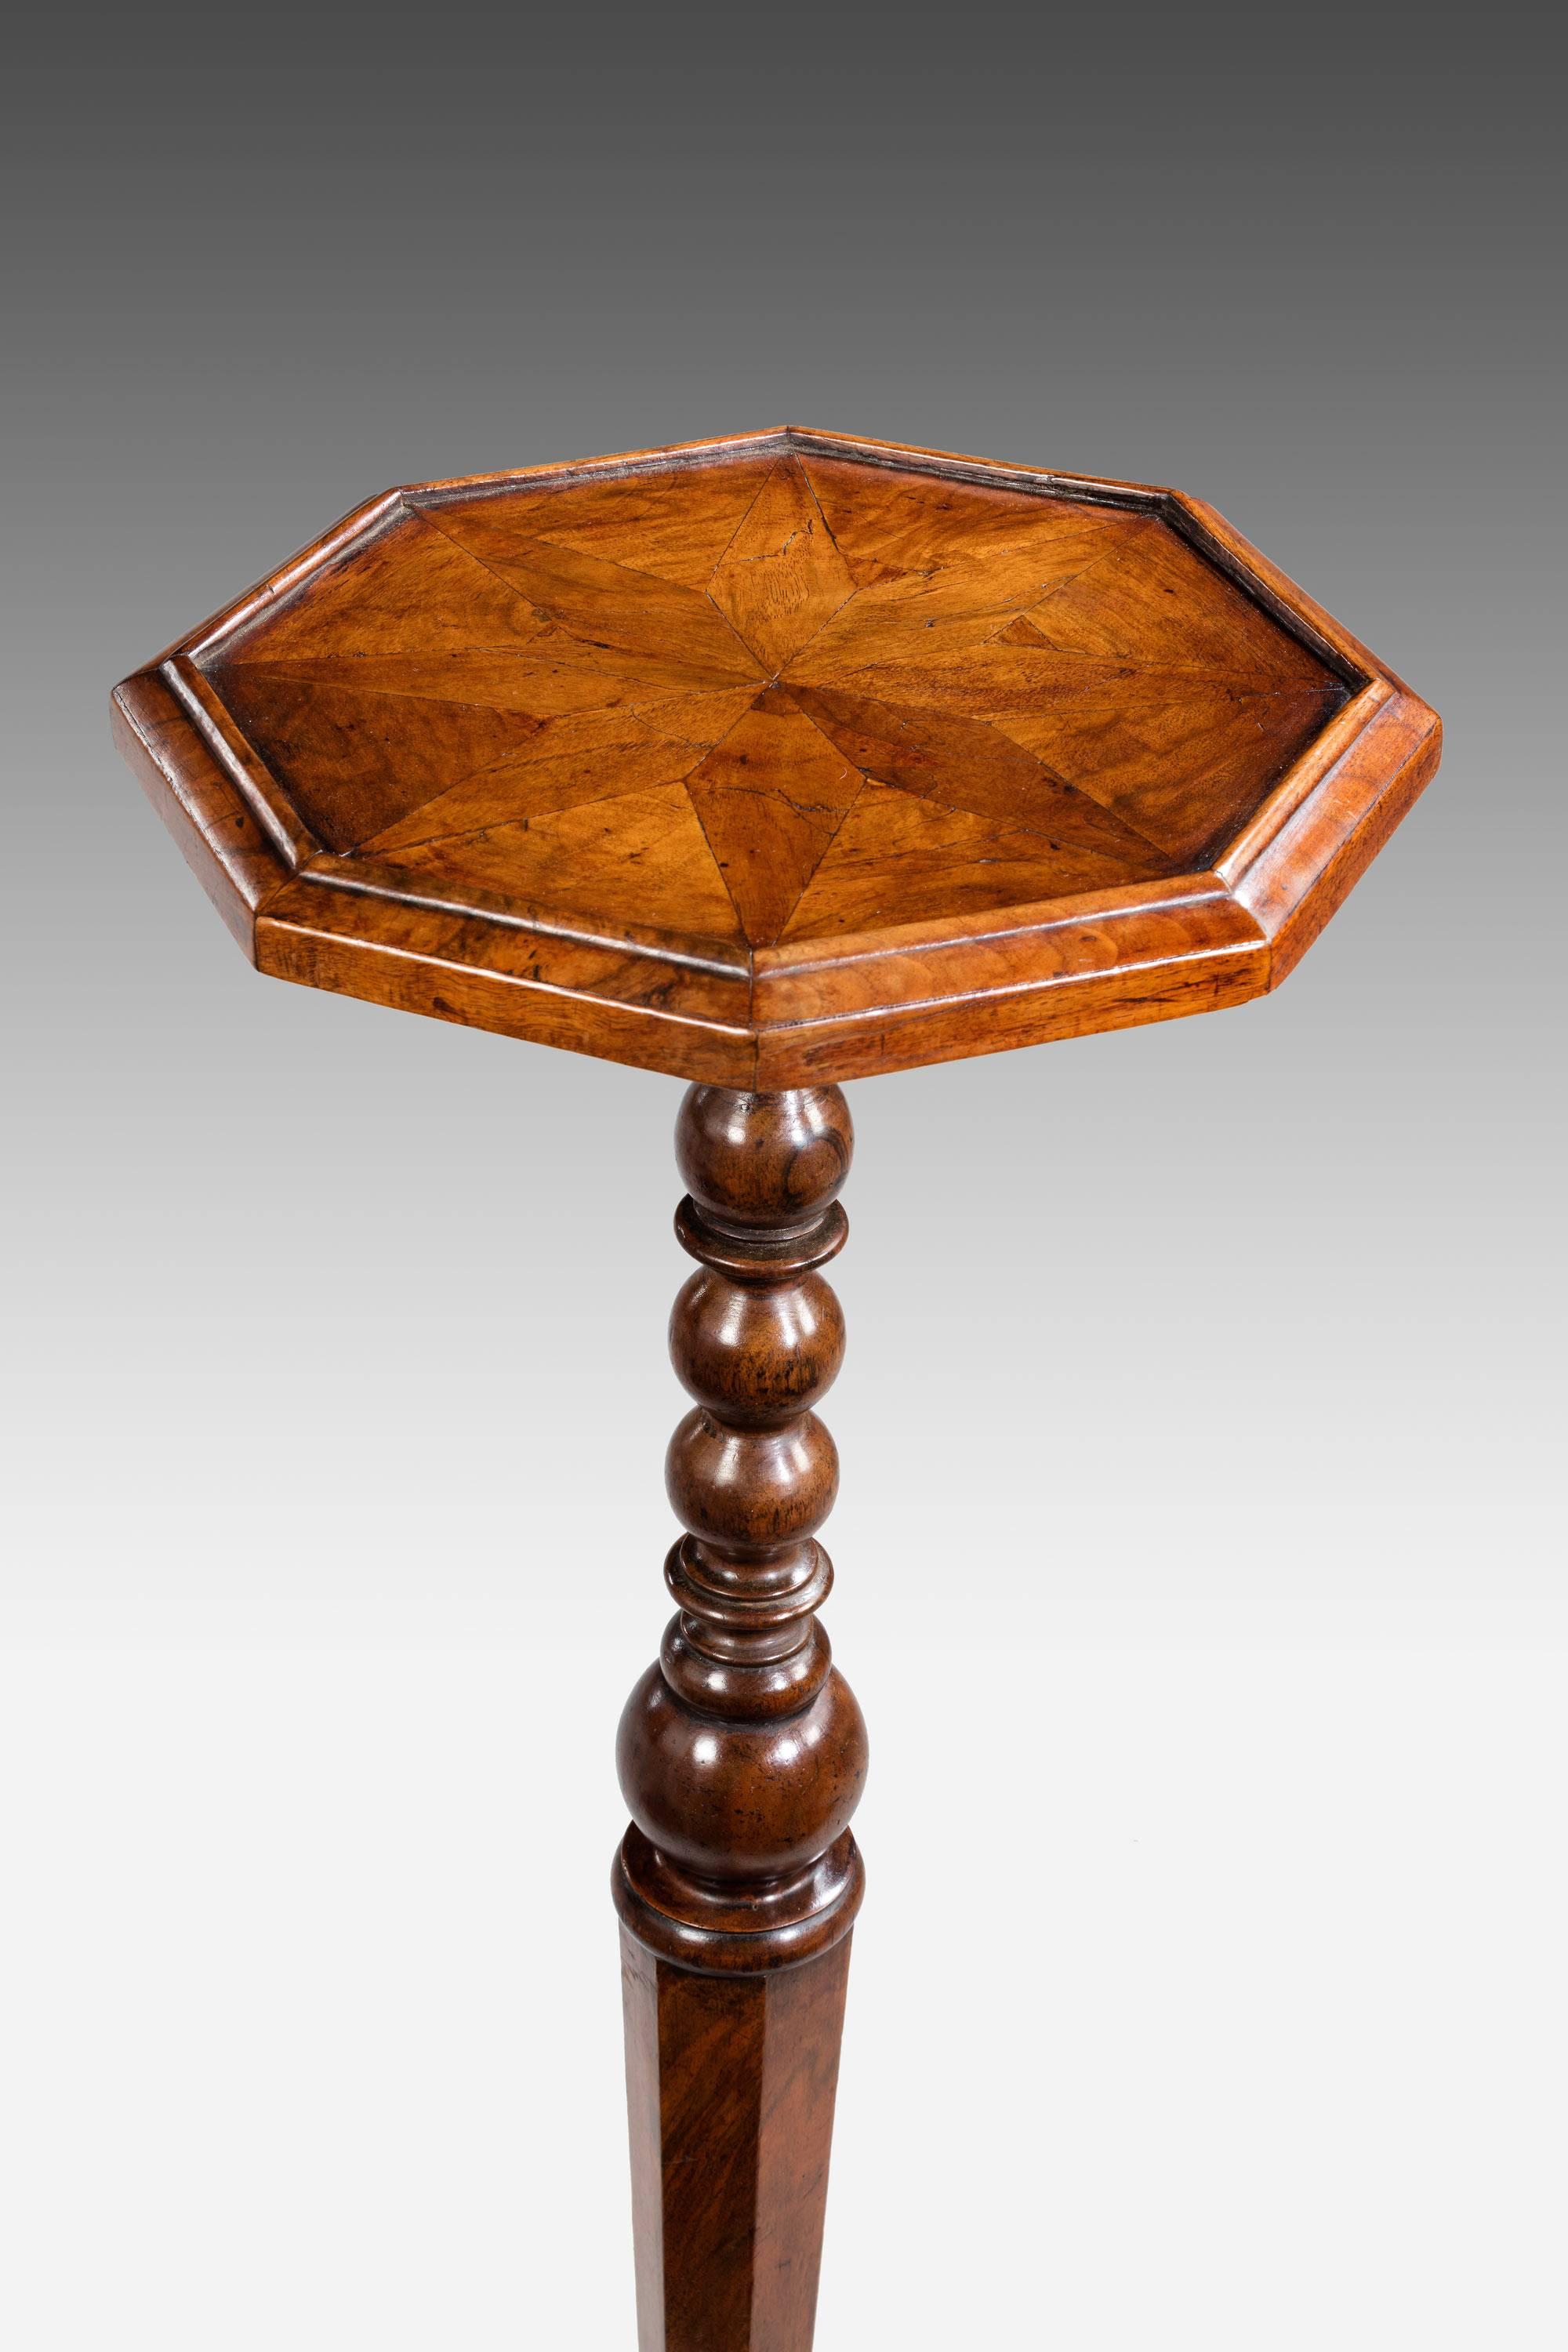 A 17th century William and Mary period walnut candle stand or torchere stand. The hexagonal centre stem with finely figured walnut veneers, over three elaborate feet. The top of very good color and patina, carefully sectioned in diamonds and